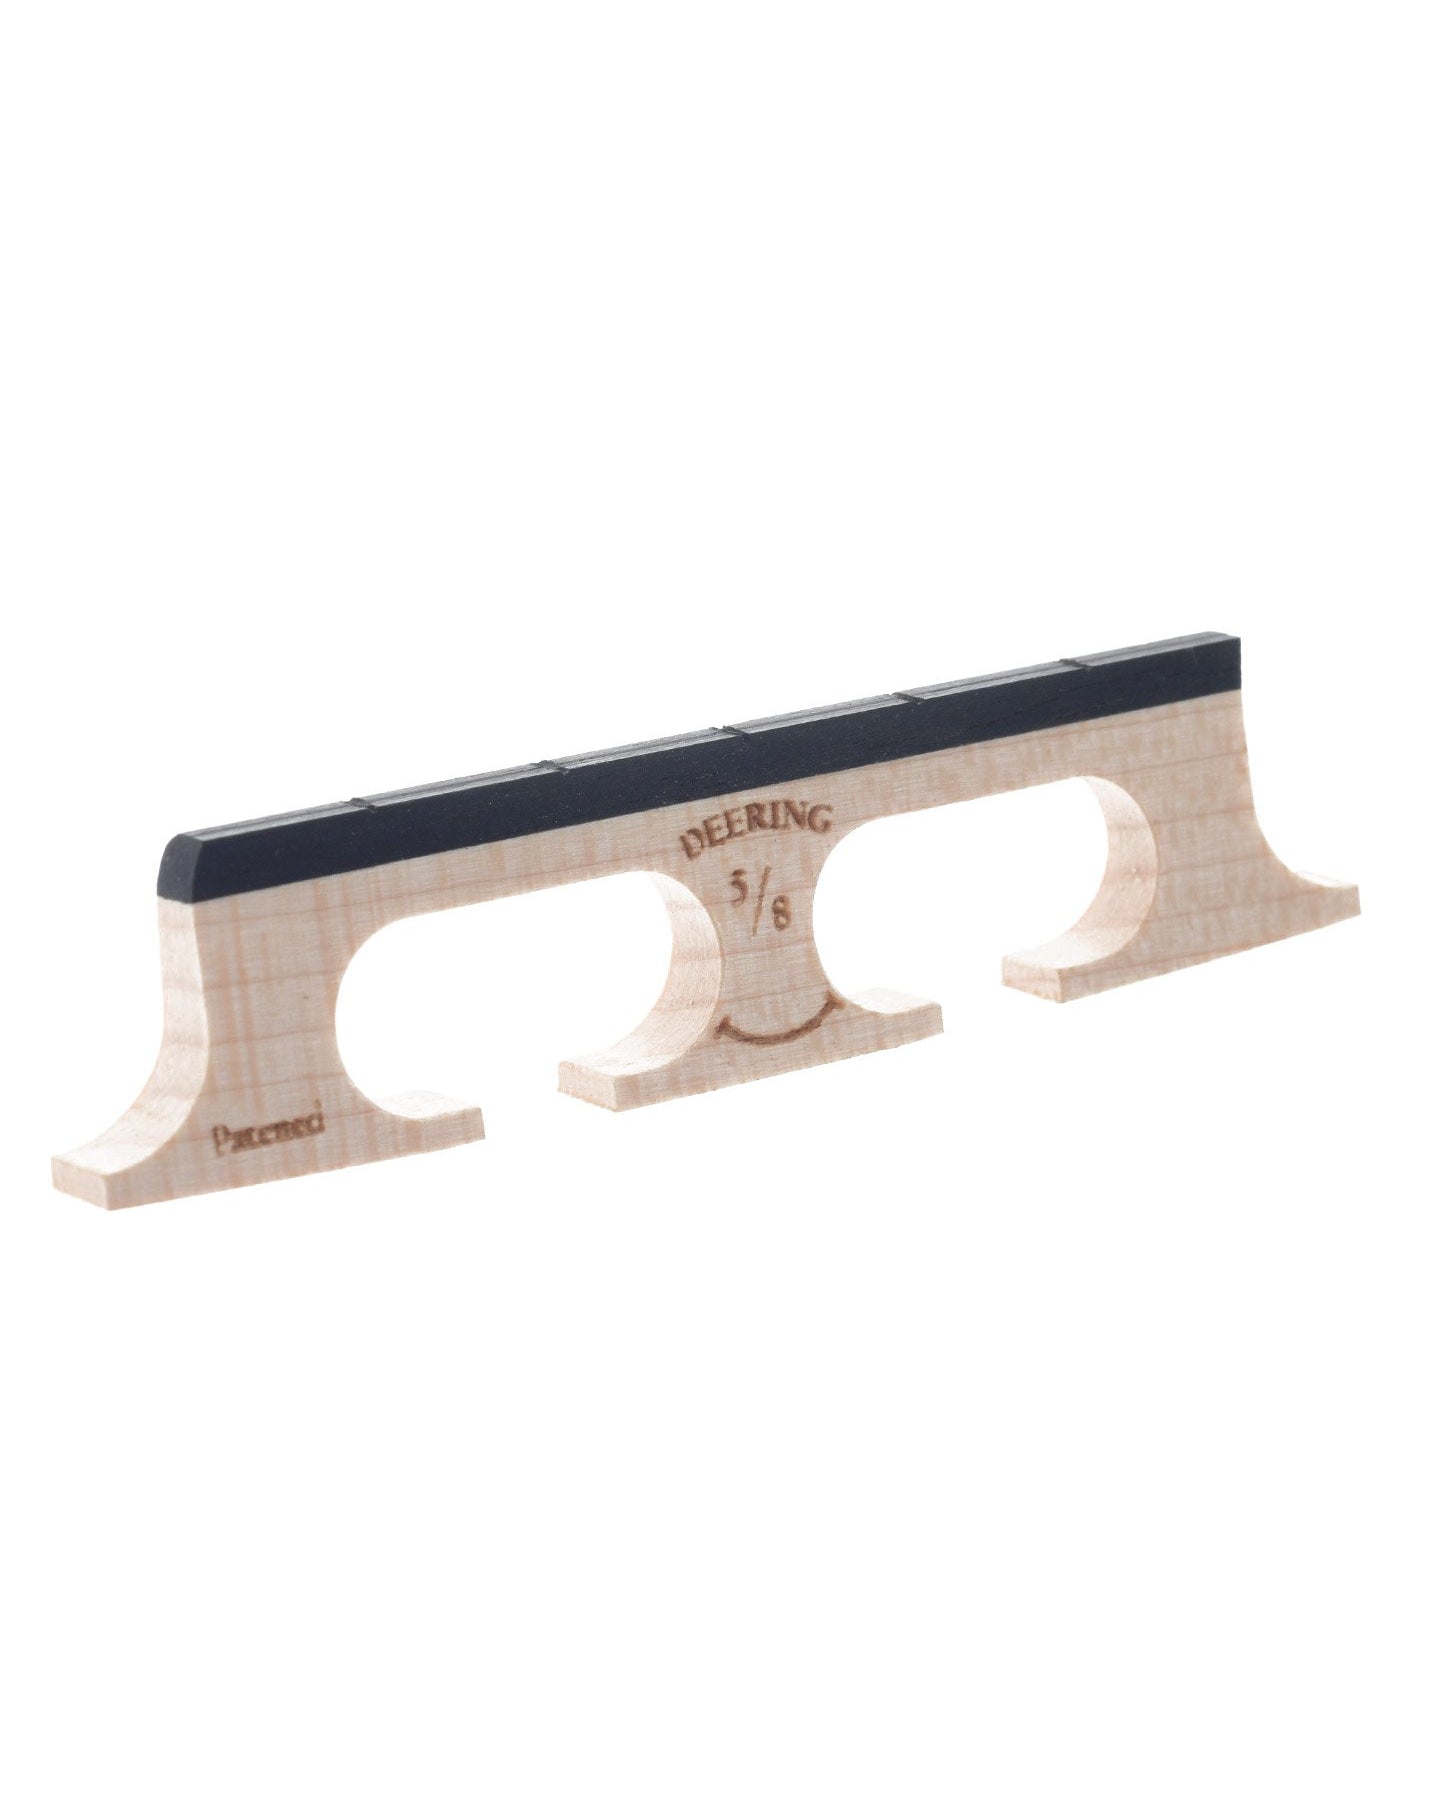 Image 1 of Deering Crowe-Spaced 5/8" Smile Banjo Bridge, with Curved Feet - SKU# BDS58C : Product Type Accessories & Parts : Elderly Instruments